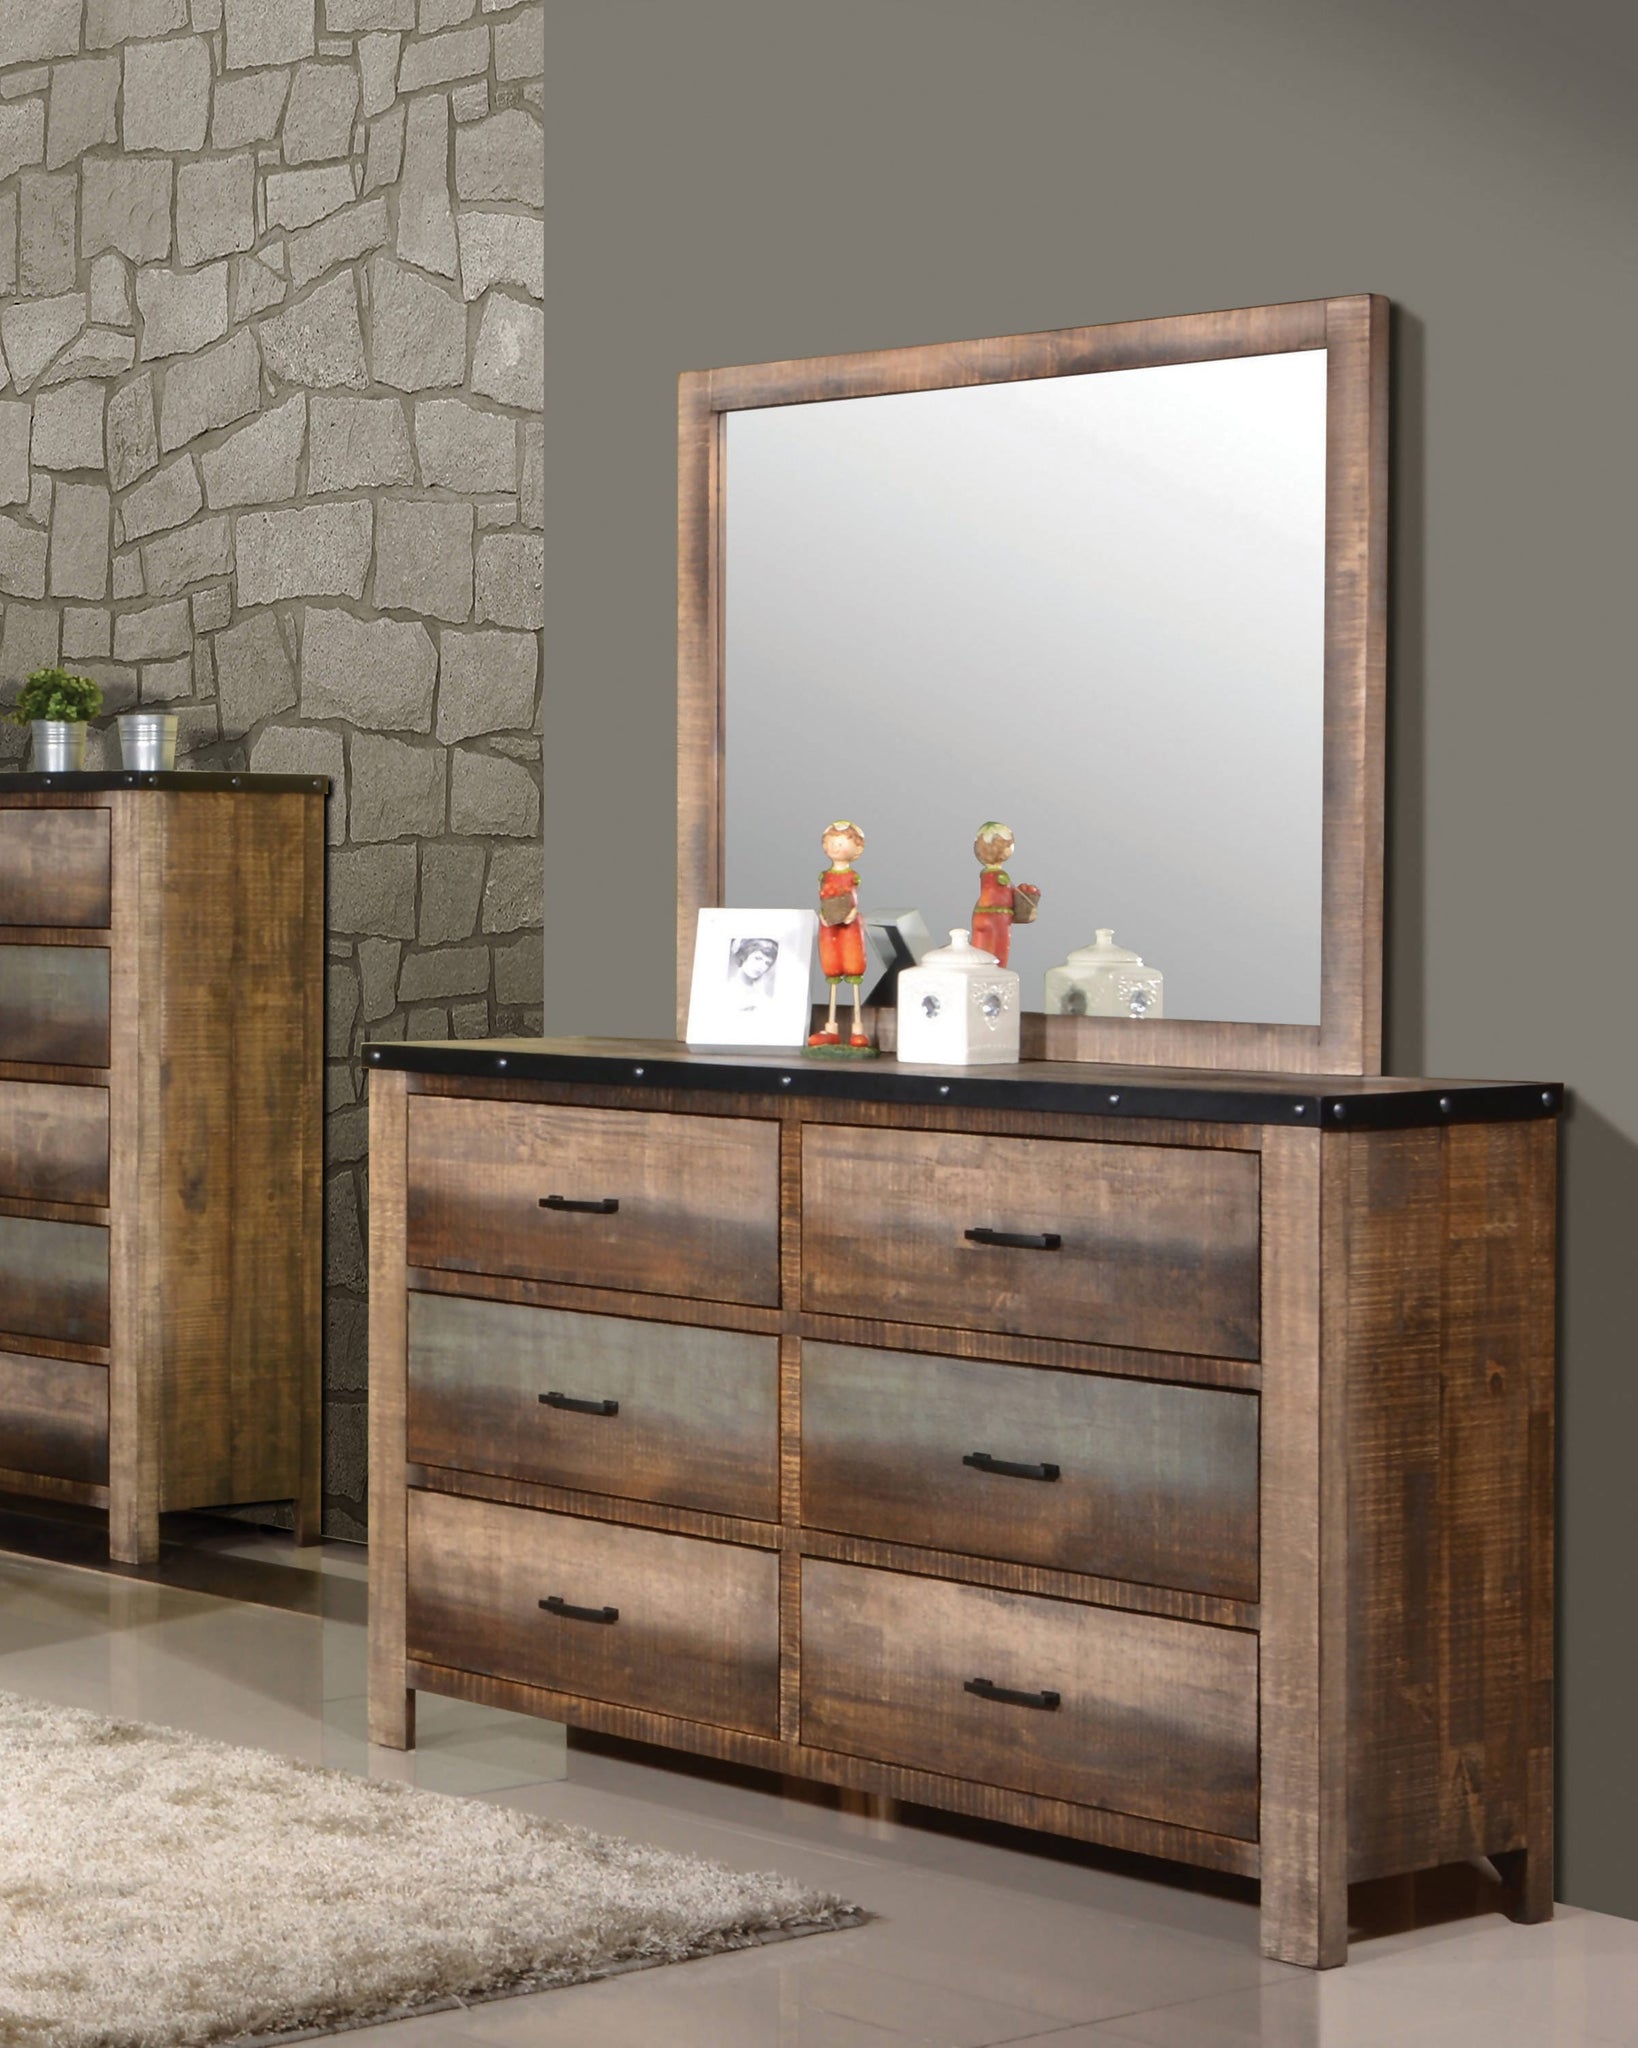 Sembene 6-Drawer Dresser Antique Multi-Color Collection: Add A Touch Of Rustic Charm To Your Bedroom Decor. This Wooden Dresser Is Finished In Pleasing Earth Tones, Giving It A Classic Look.  SKU: 205093